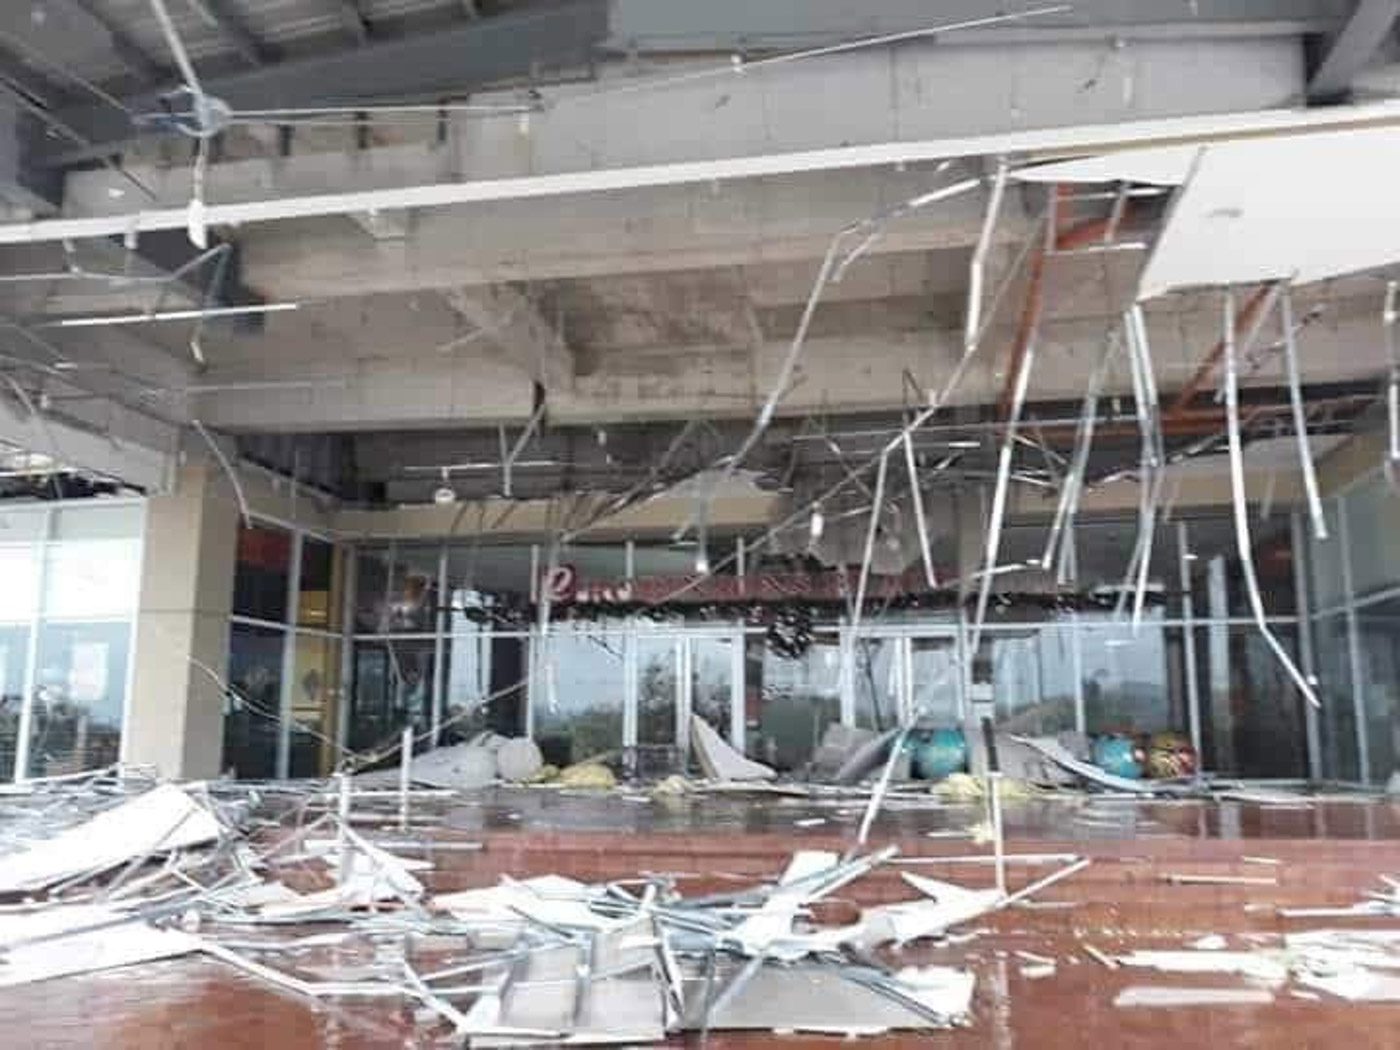 ROBINSONS MALL IN ROXAS CITY, CAPIZ. Photo from Philippine Emergency Alerts 